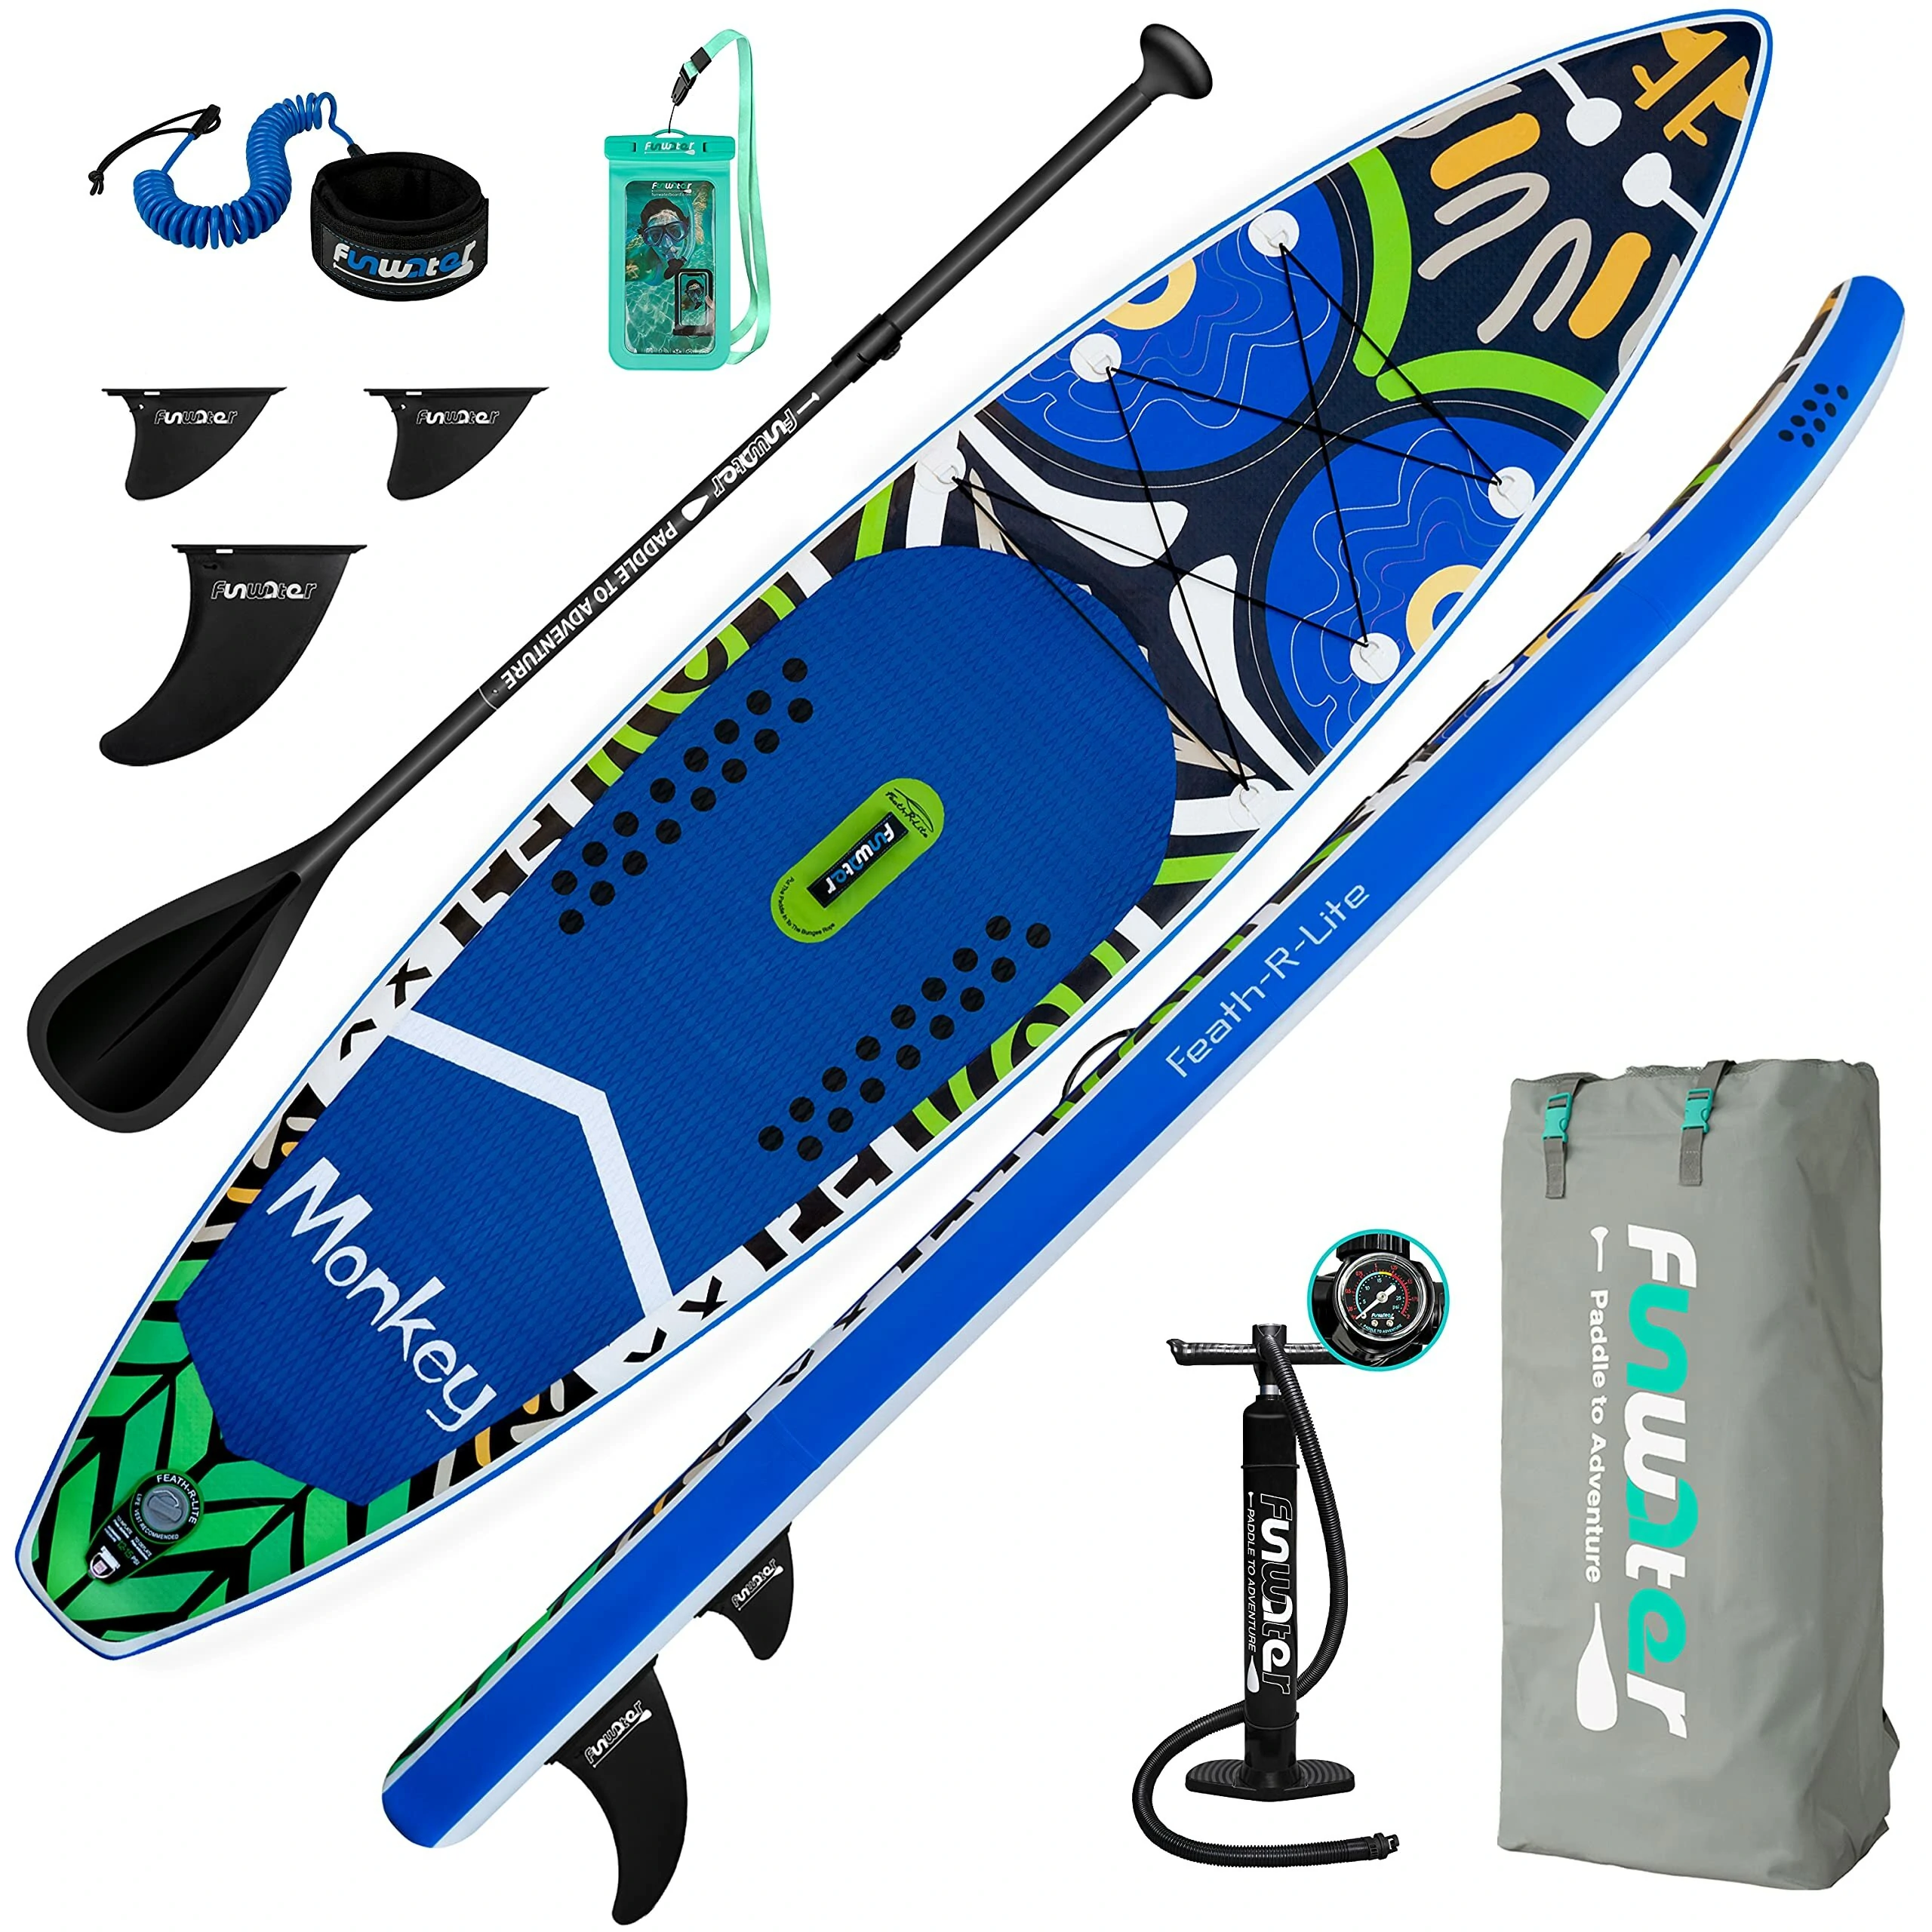 [EU Direct] FunWater Inflatable Stand Up Paddle Board Surfboard Complete Paddleboard Accessories Adjustable Paddle, Pump, ISUP Travel Backpack, Leash, Waterproof Bag, Adult Paddle Board SUPFR02A